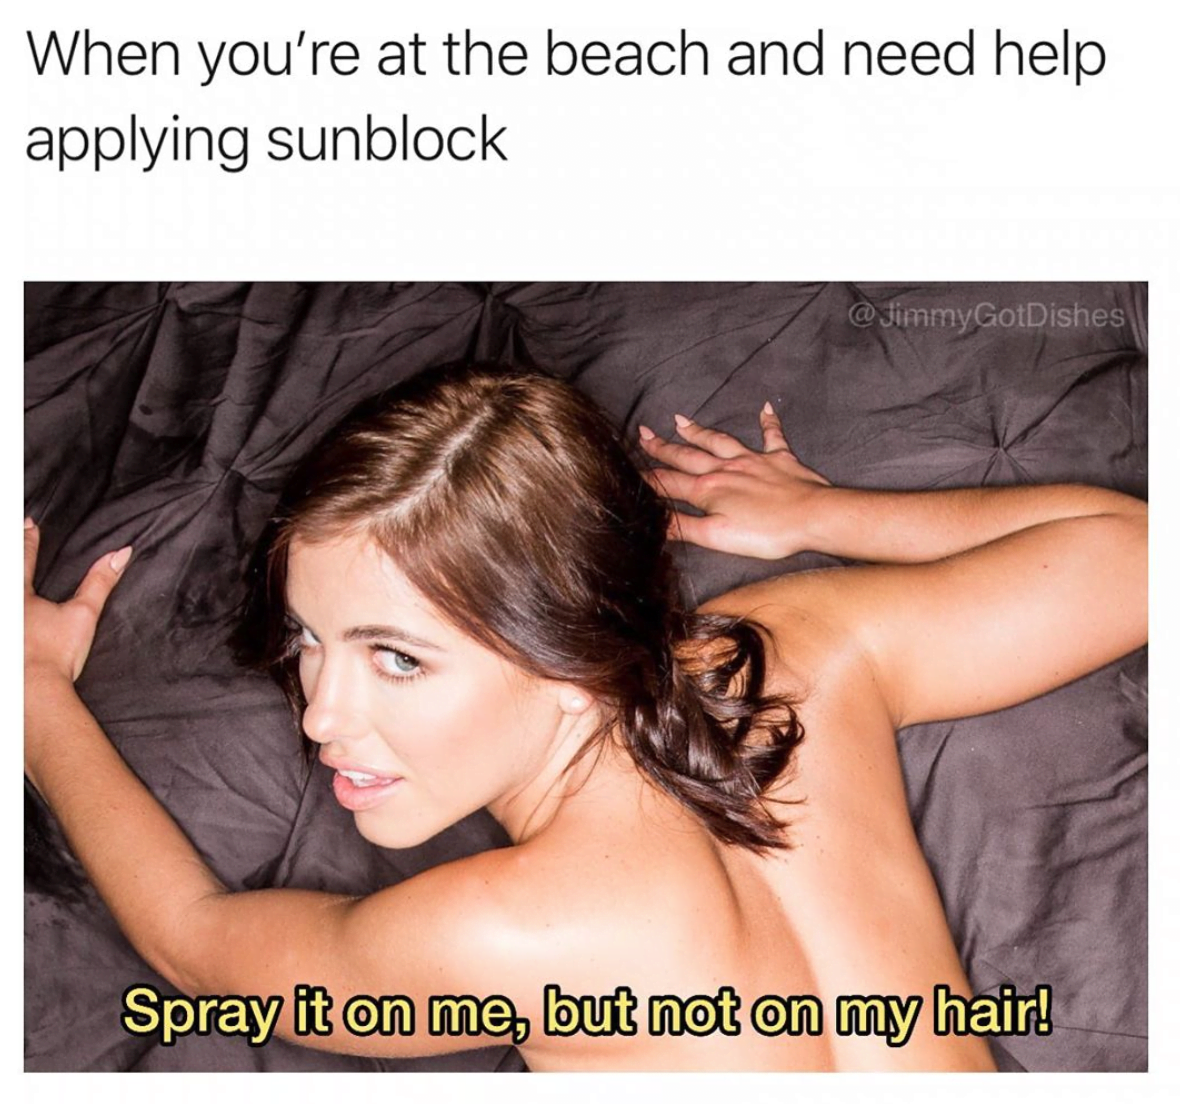 sex memes - adriana chechik spray it on me but not on my hair - When you're at the beach and need help applying sunblock Dishes Spray it on me, but not on my hair!